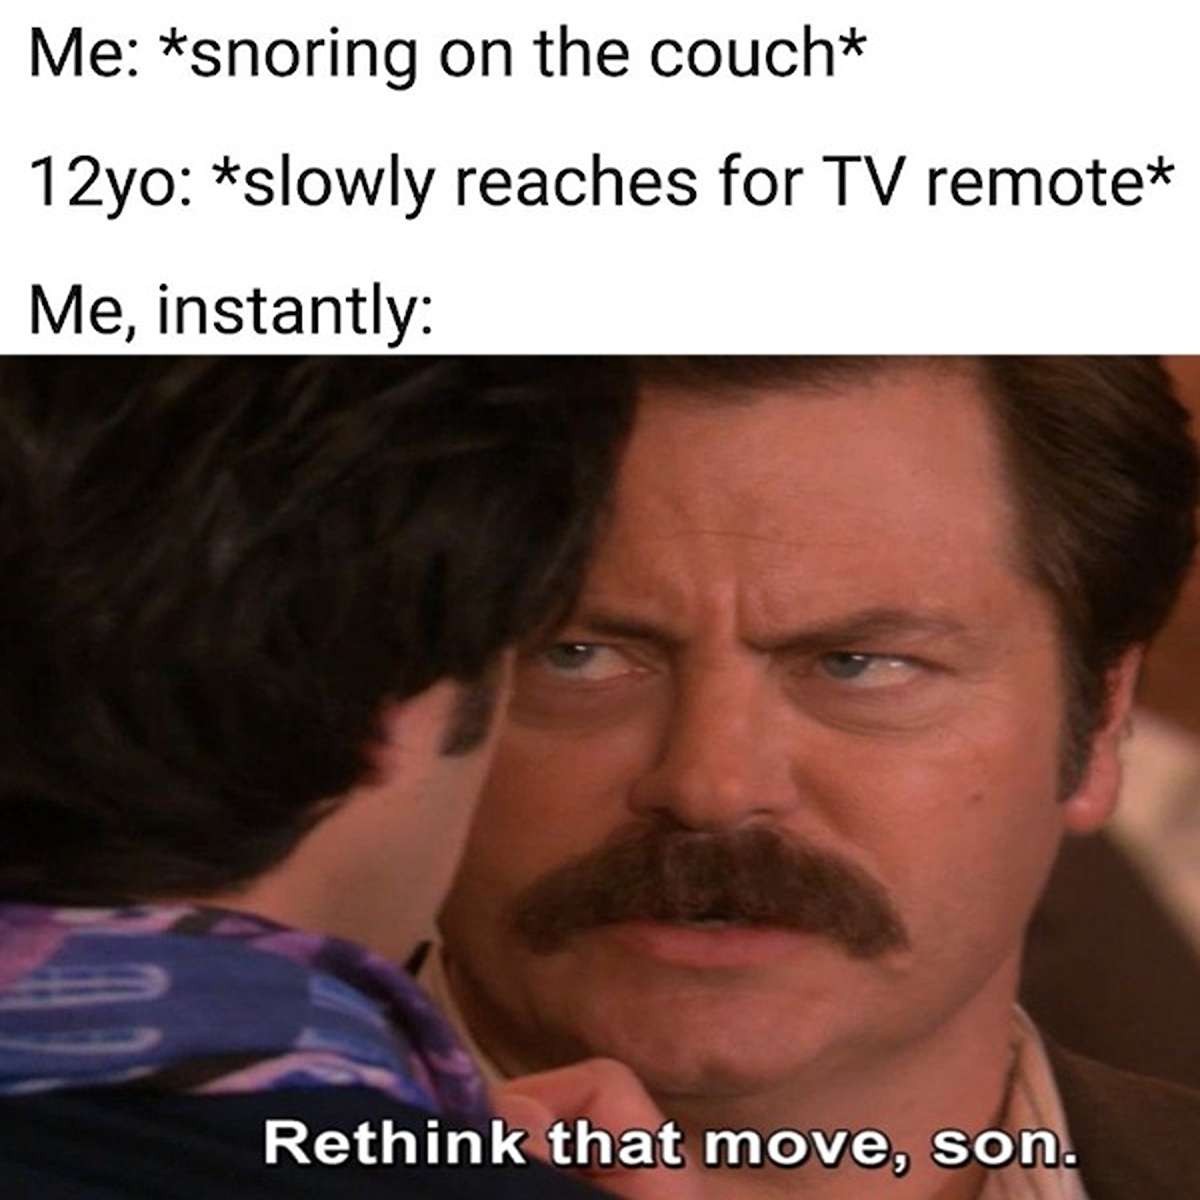 dank memes - Me snoring on the couch 12yo slowly reaches for Tv remote Me, instantly Rethink that move, son.